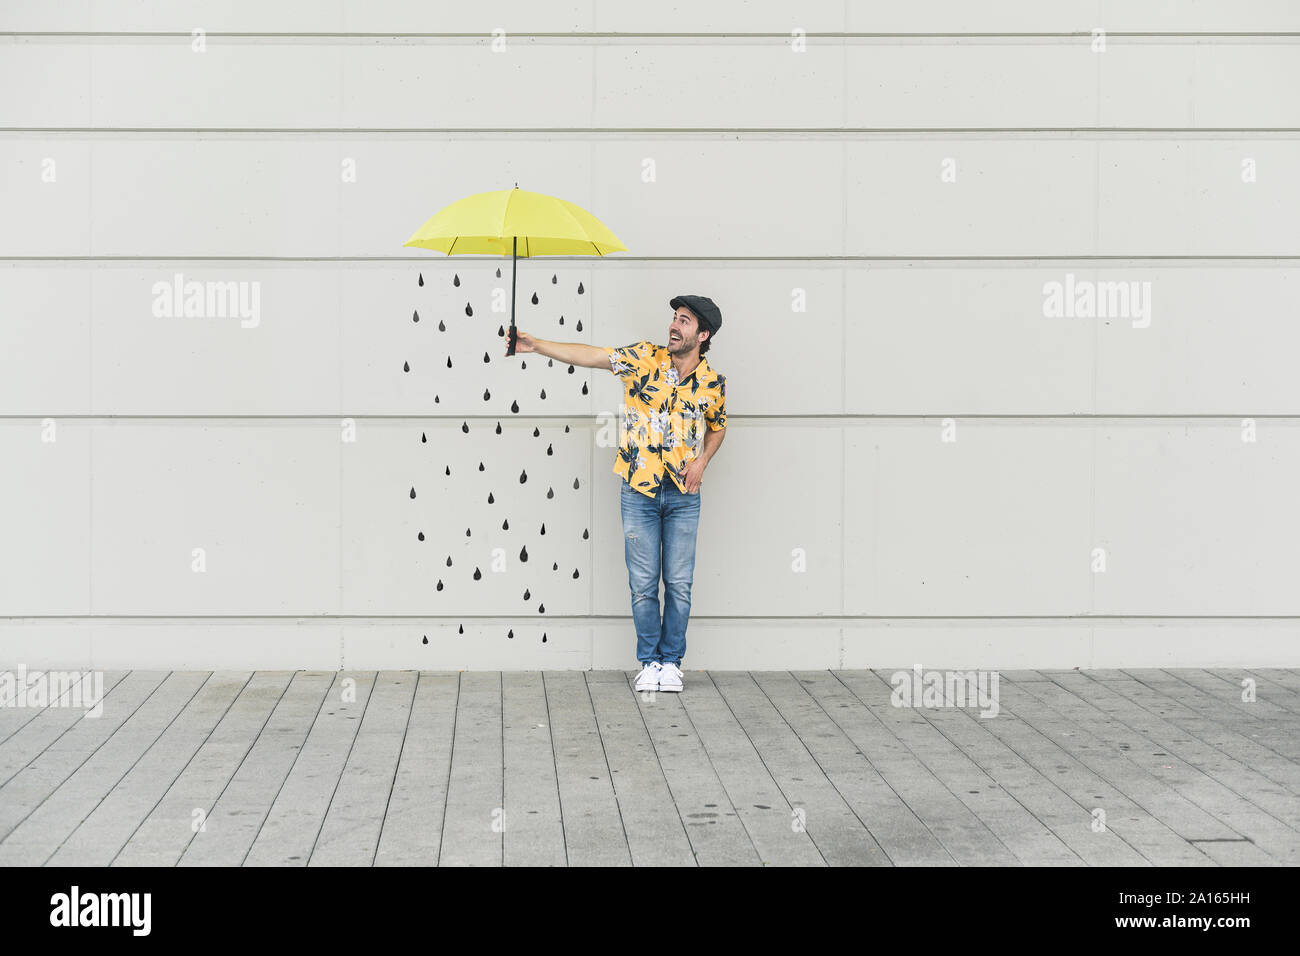 Digital composite of young man holding an umbrella at a wall with raindrops Stock Photo